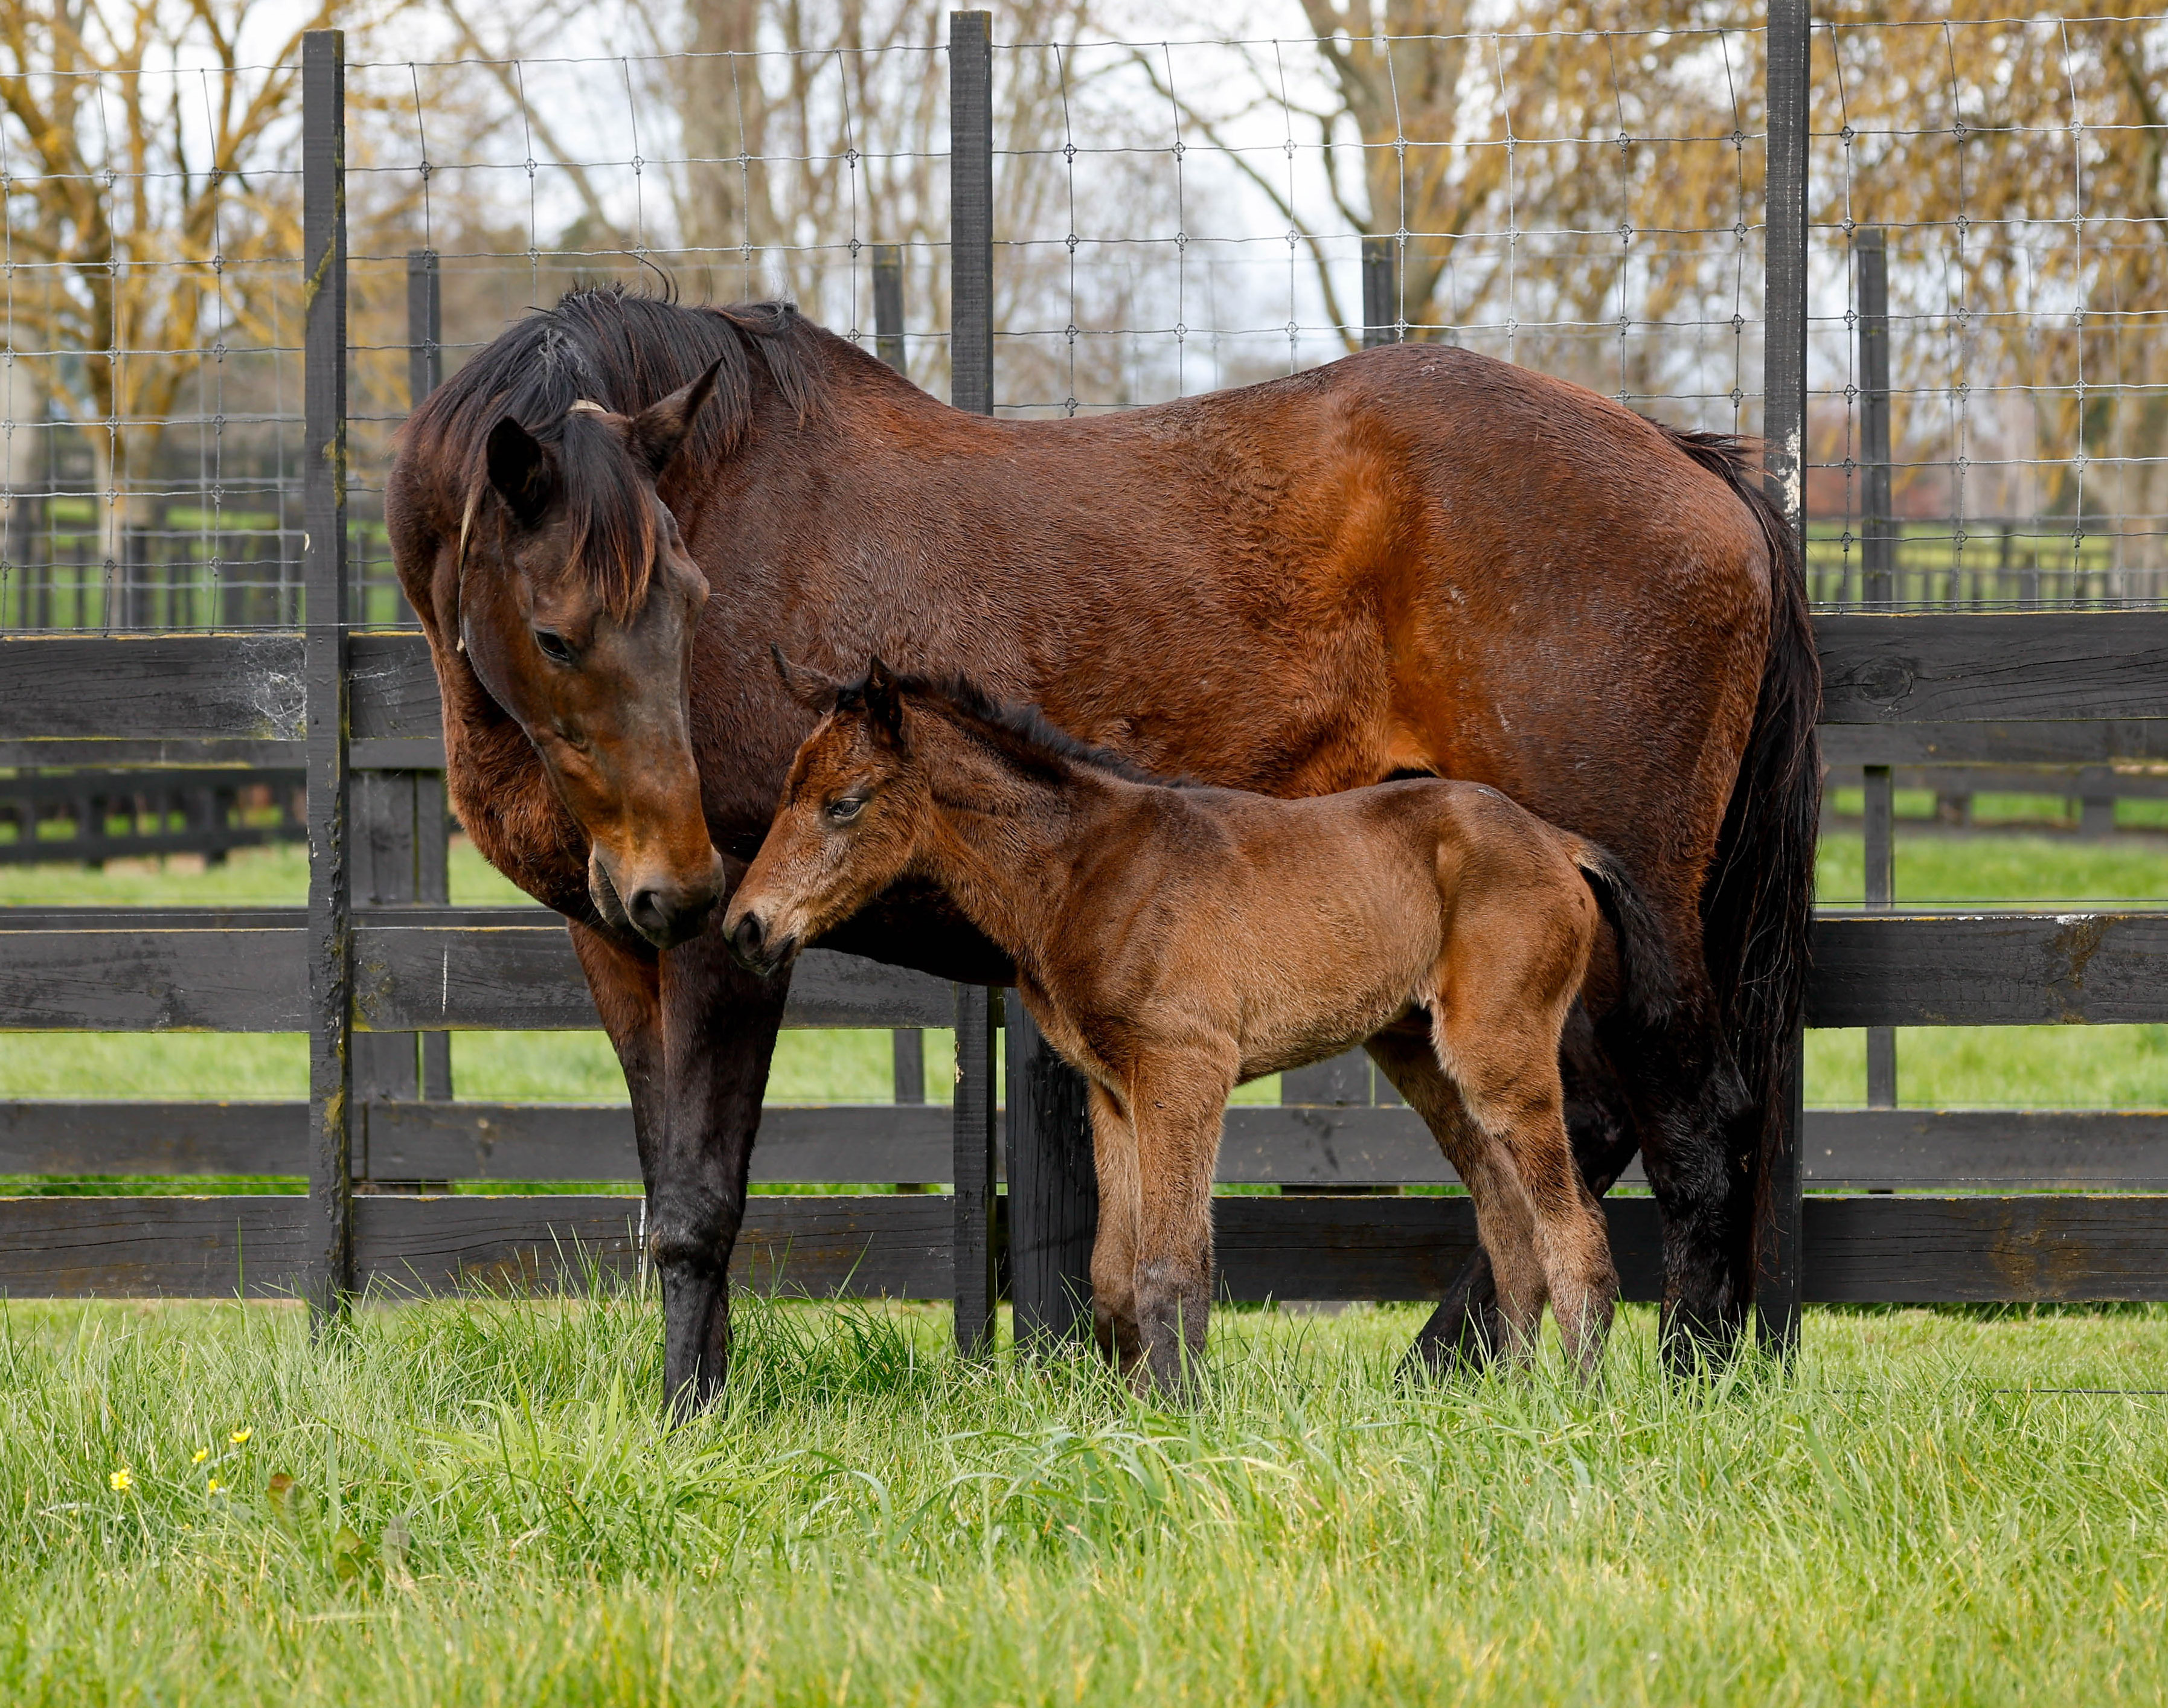 Insouciant 2023 Tarzino filly 1729 cropped